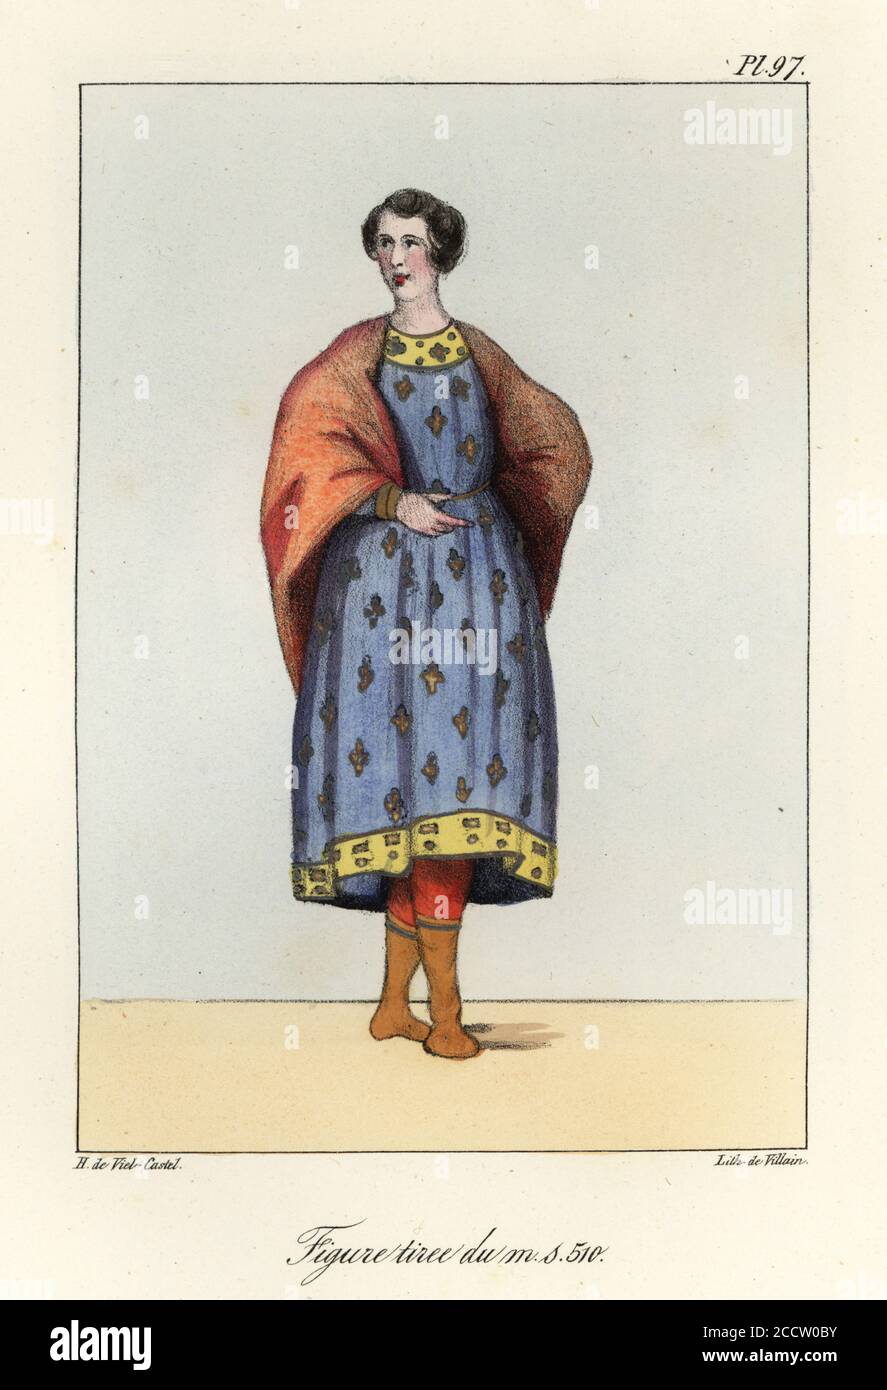 Woman in cloak and tunic, hose and boots, 9th century.  From illuminated manuscript 510 by Gregory of Nazianzus. Figure tiree du MS 510. Handcoloured lithograph by Villain after an illustration by Horace de Viel-Castel from his Collection des costumes, armes et meubles pour servir à l'histoire de la France (Collection of costumes, weapons and furniture to be used in the history of France), Treuttel & Wurtz, Bossange, 1827. Stock Photo